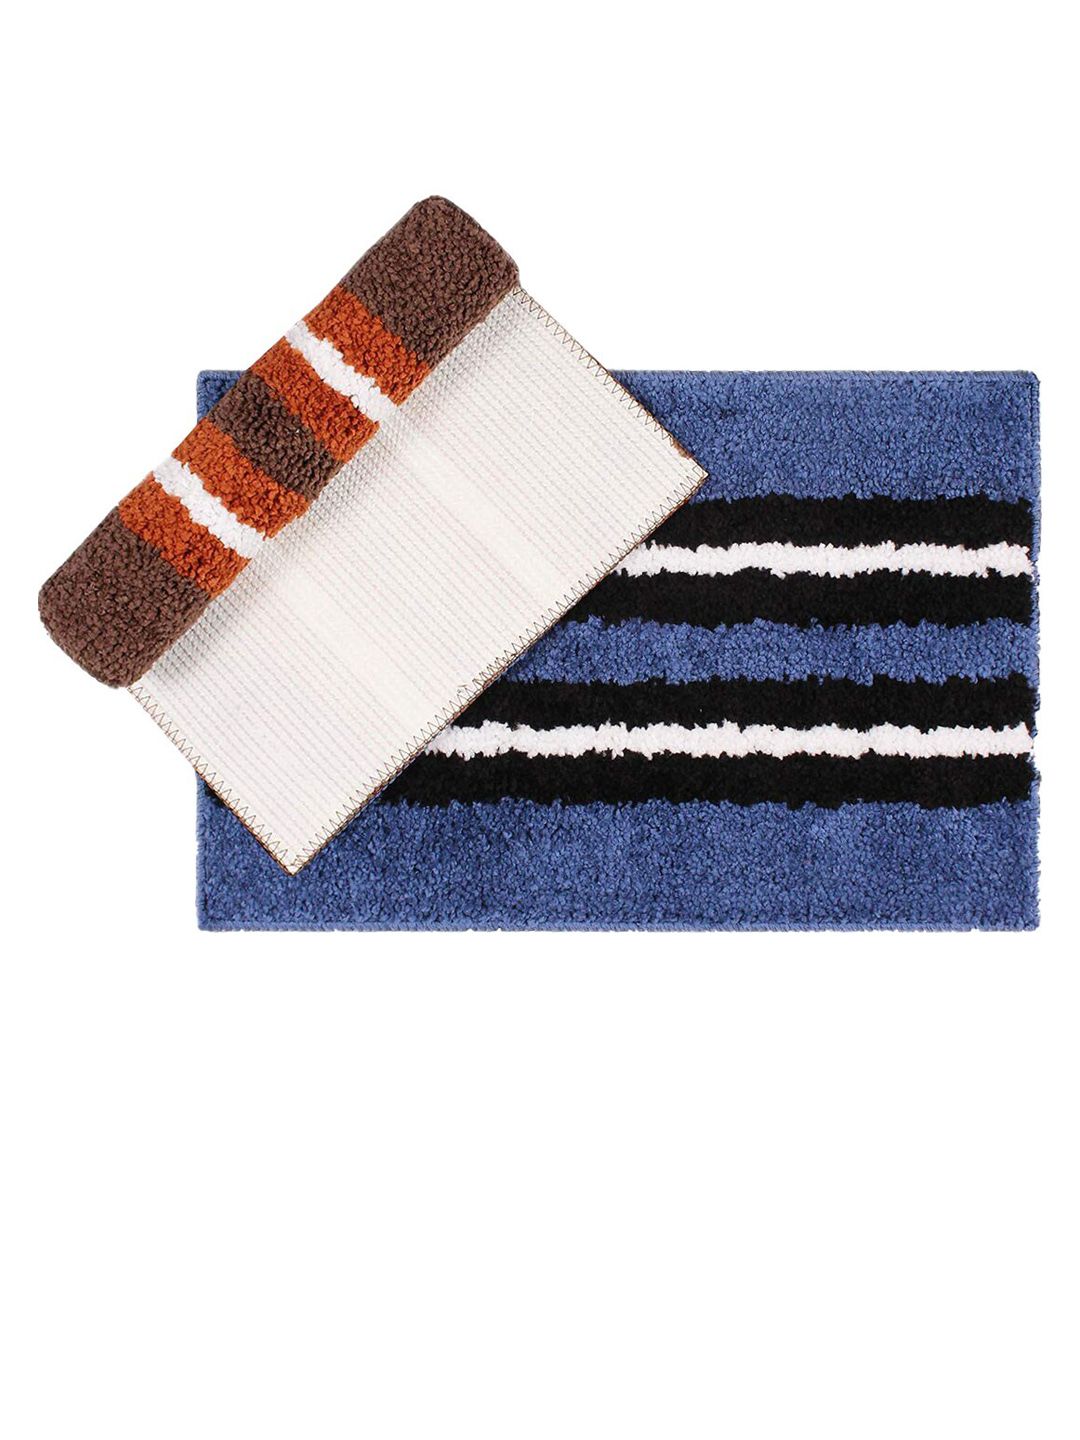 LUXEHOME INTERNATIONAL Rust & Blue Set of 2 Stripped Bath Rugs Price in India